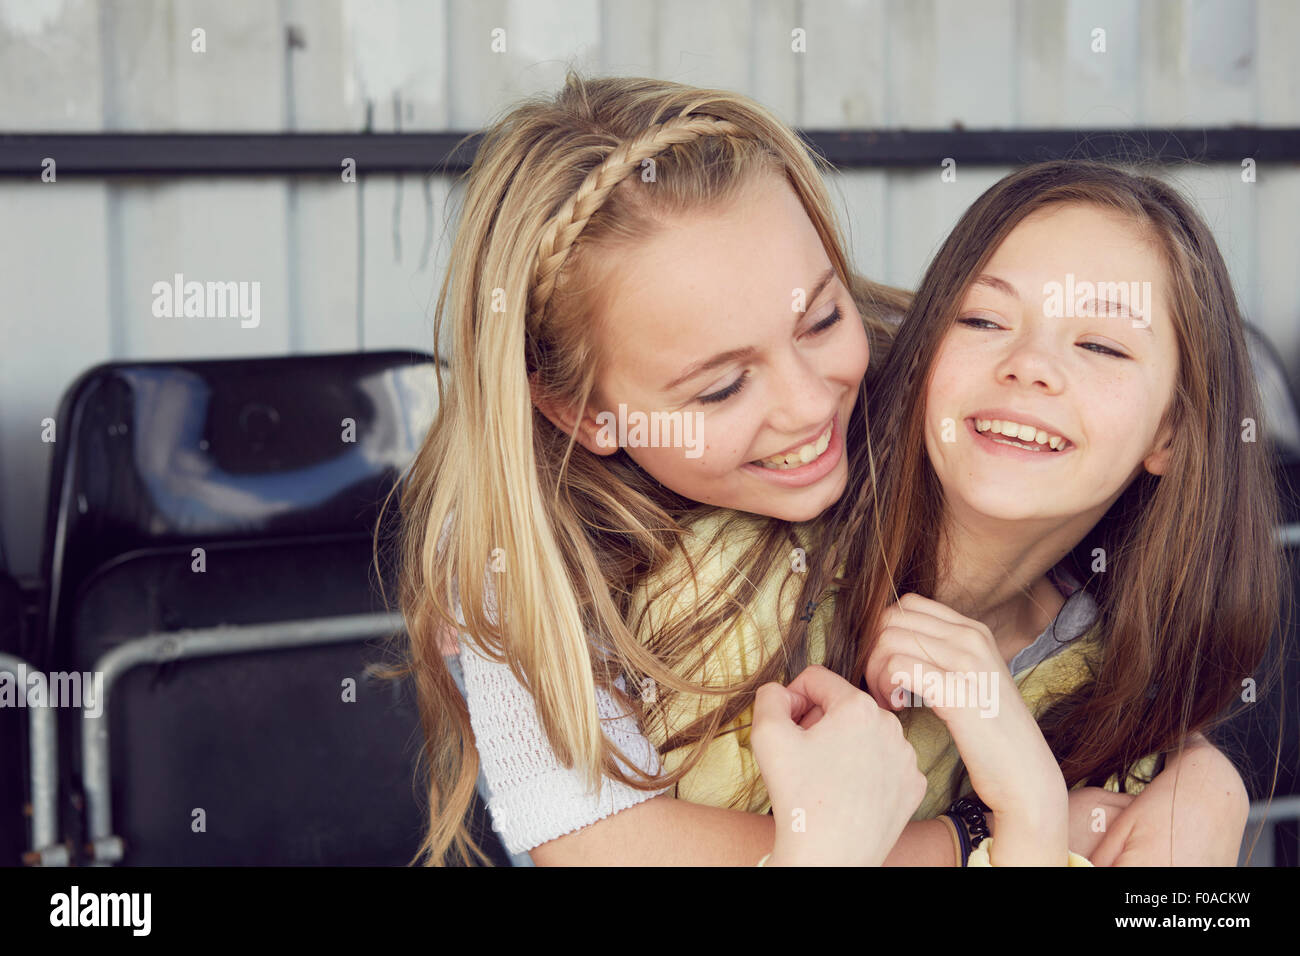 Portrait of two smiling girls hugging in stadium stand Stock Photo